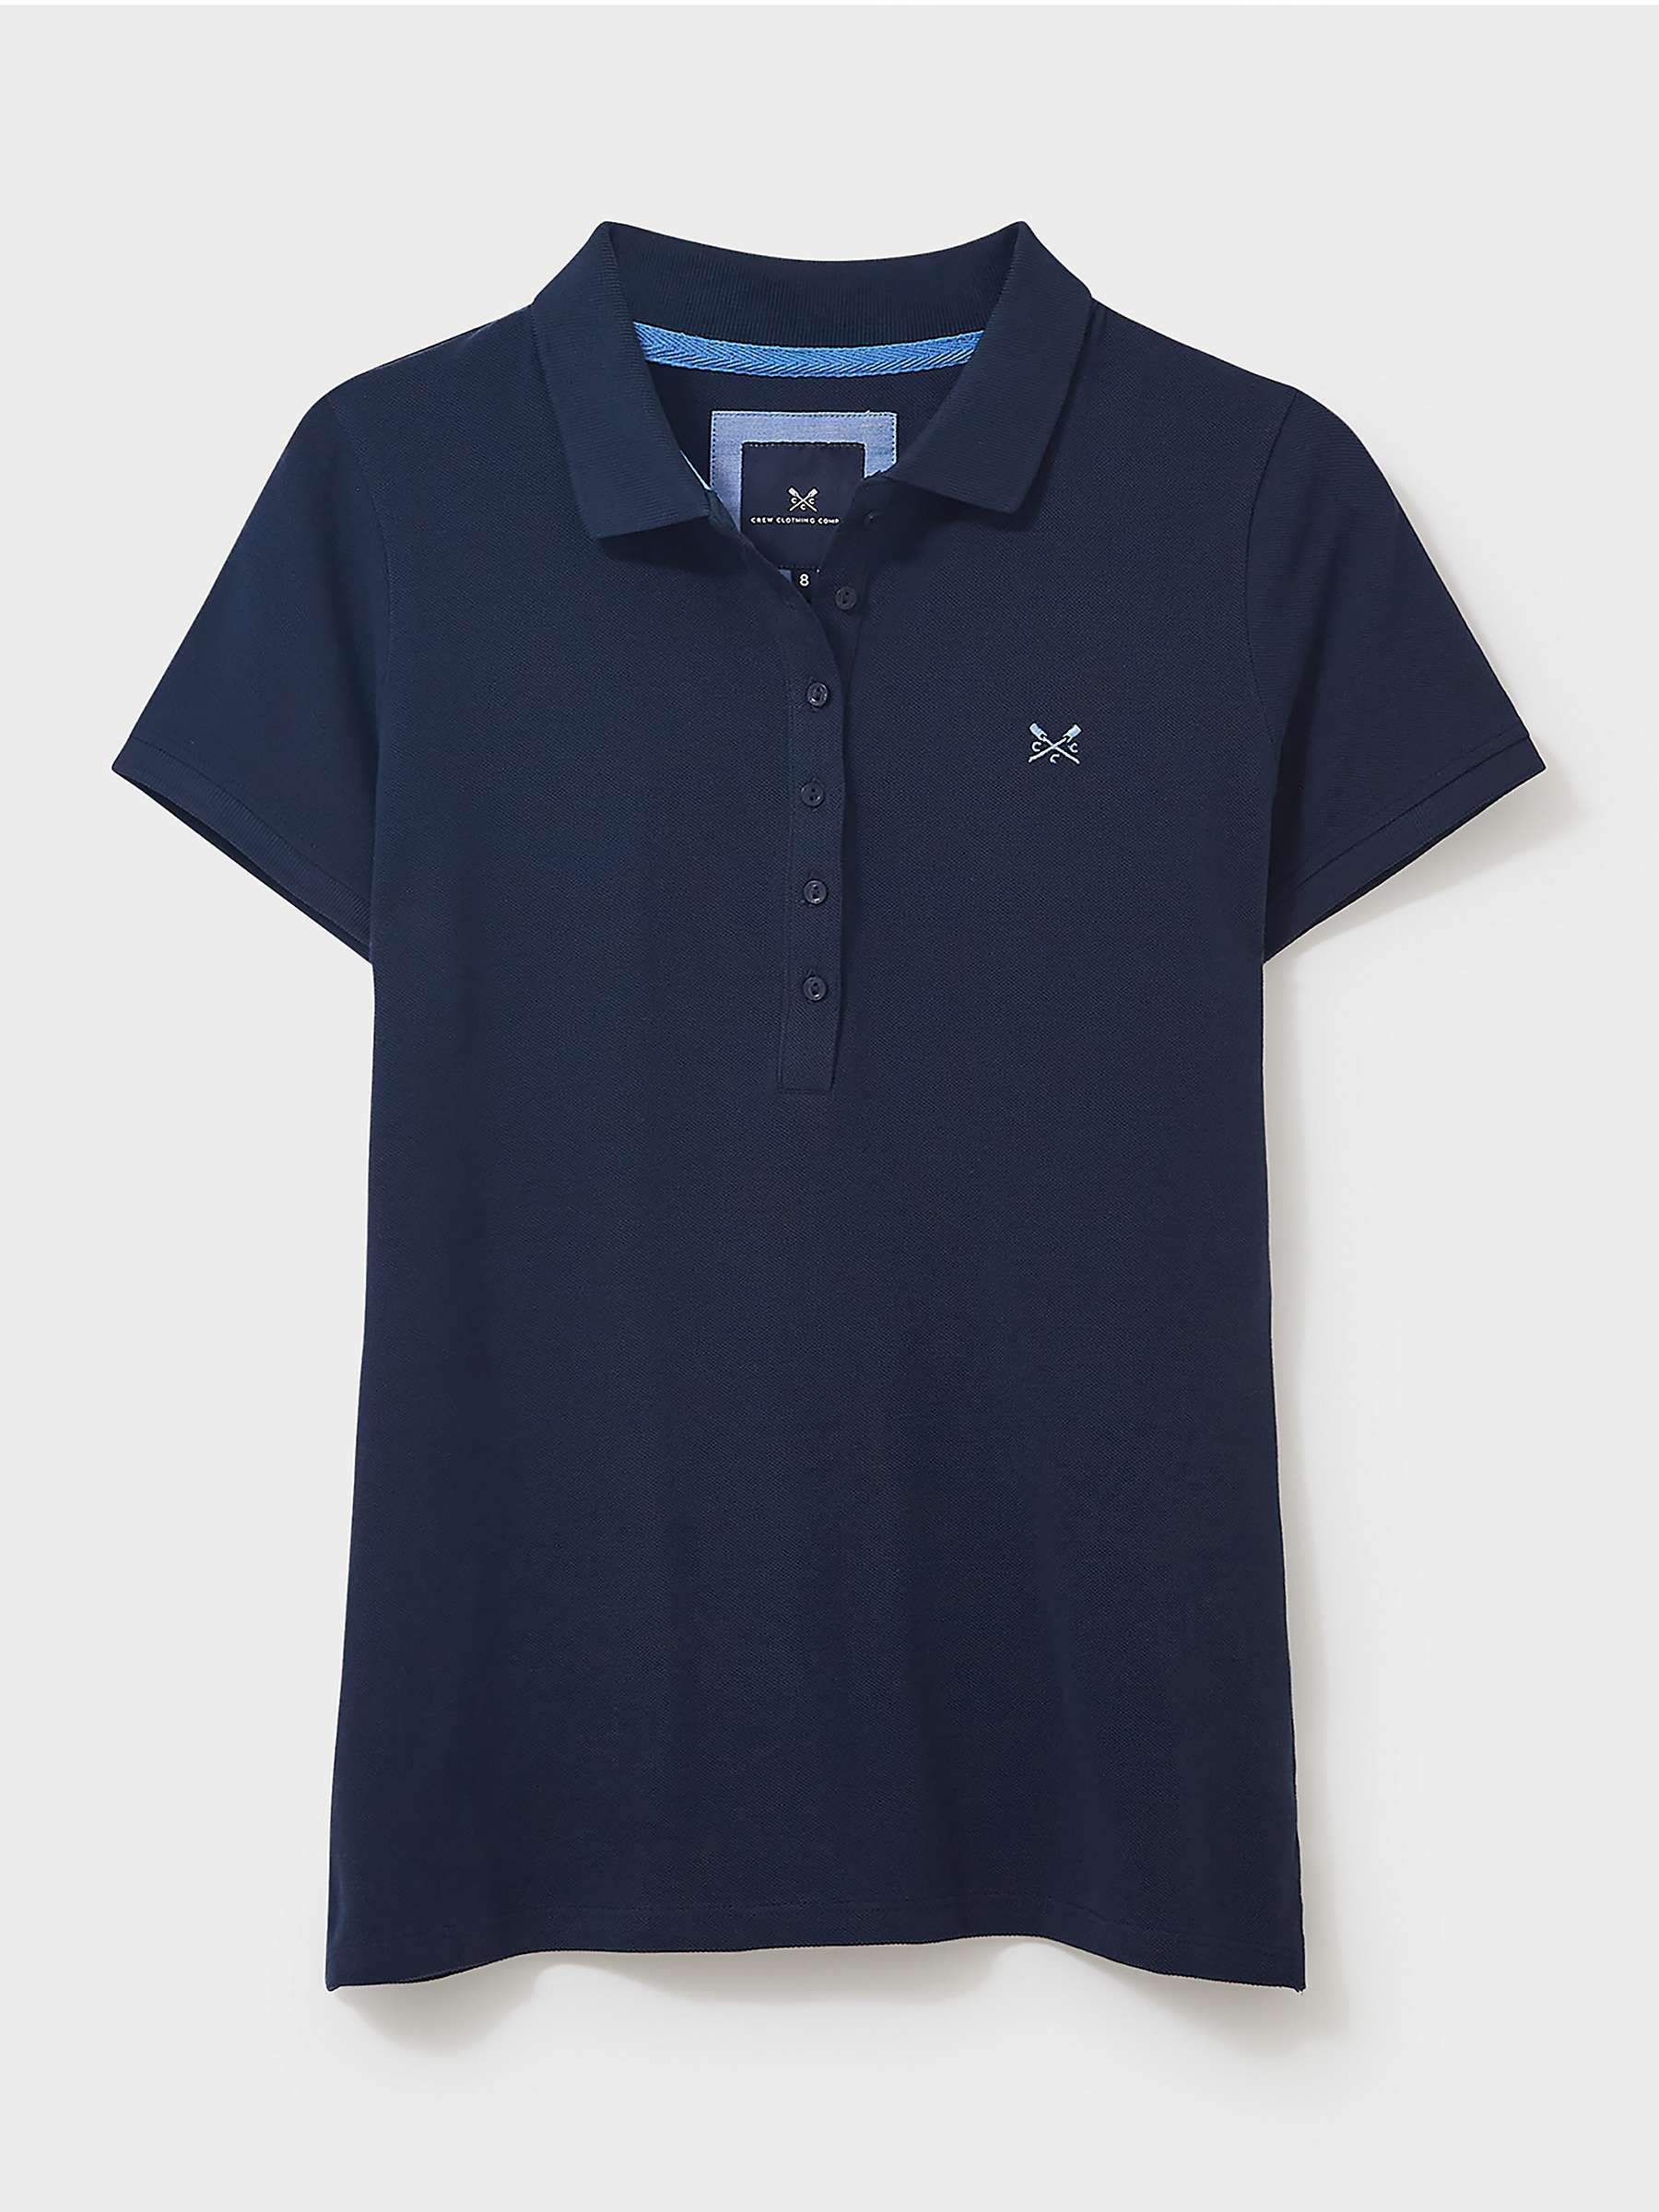 Buy Crew Clothing Classic Polo Shirt Online at johnlewis.com